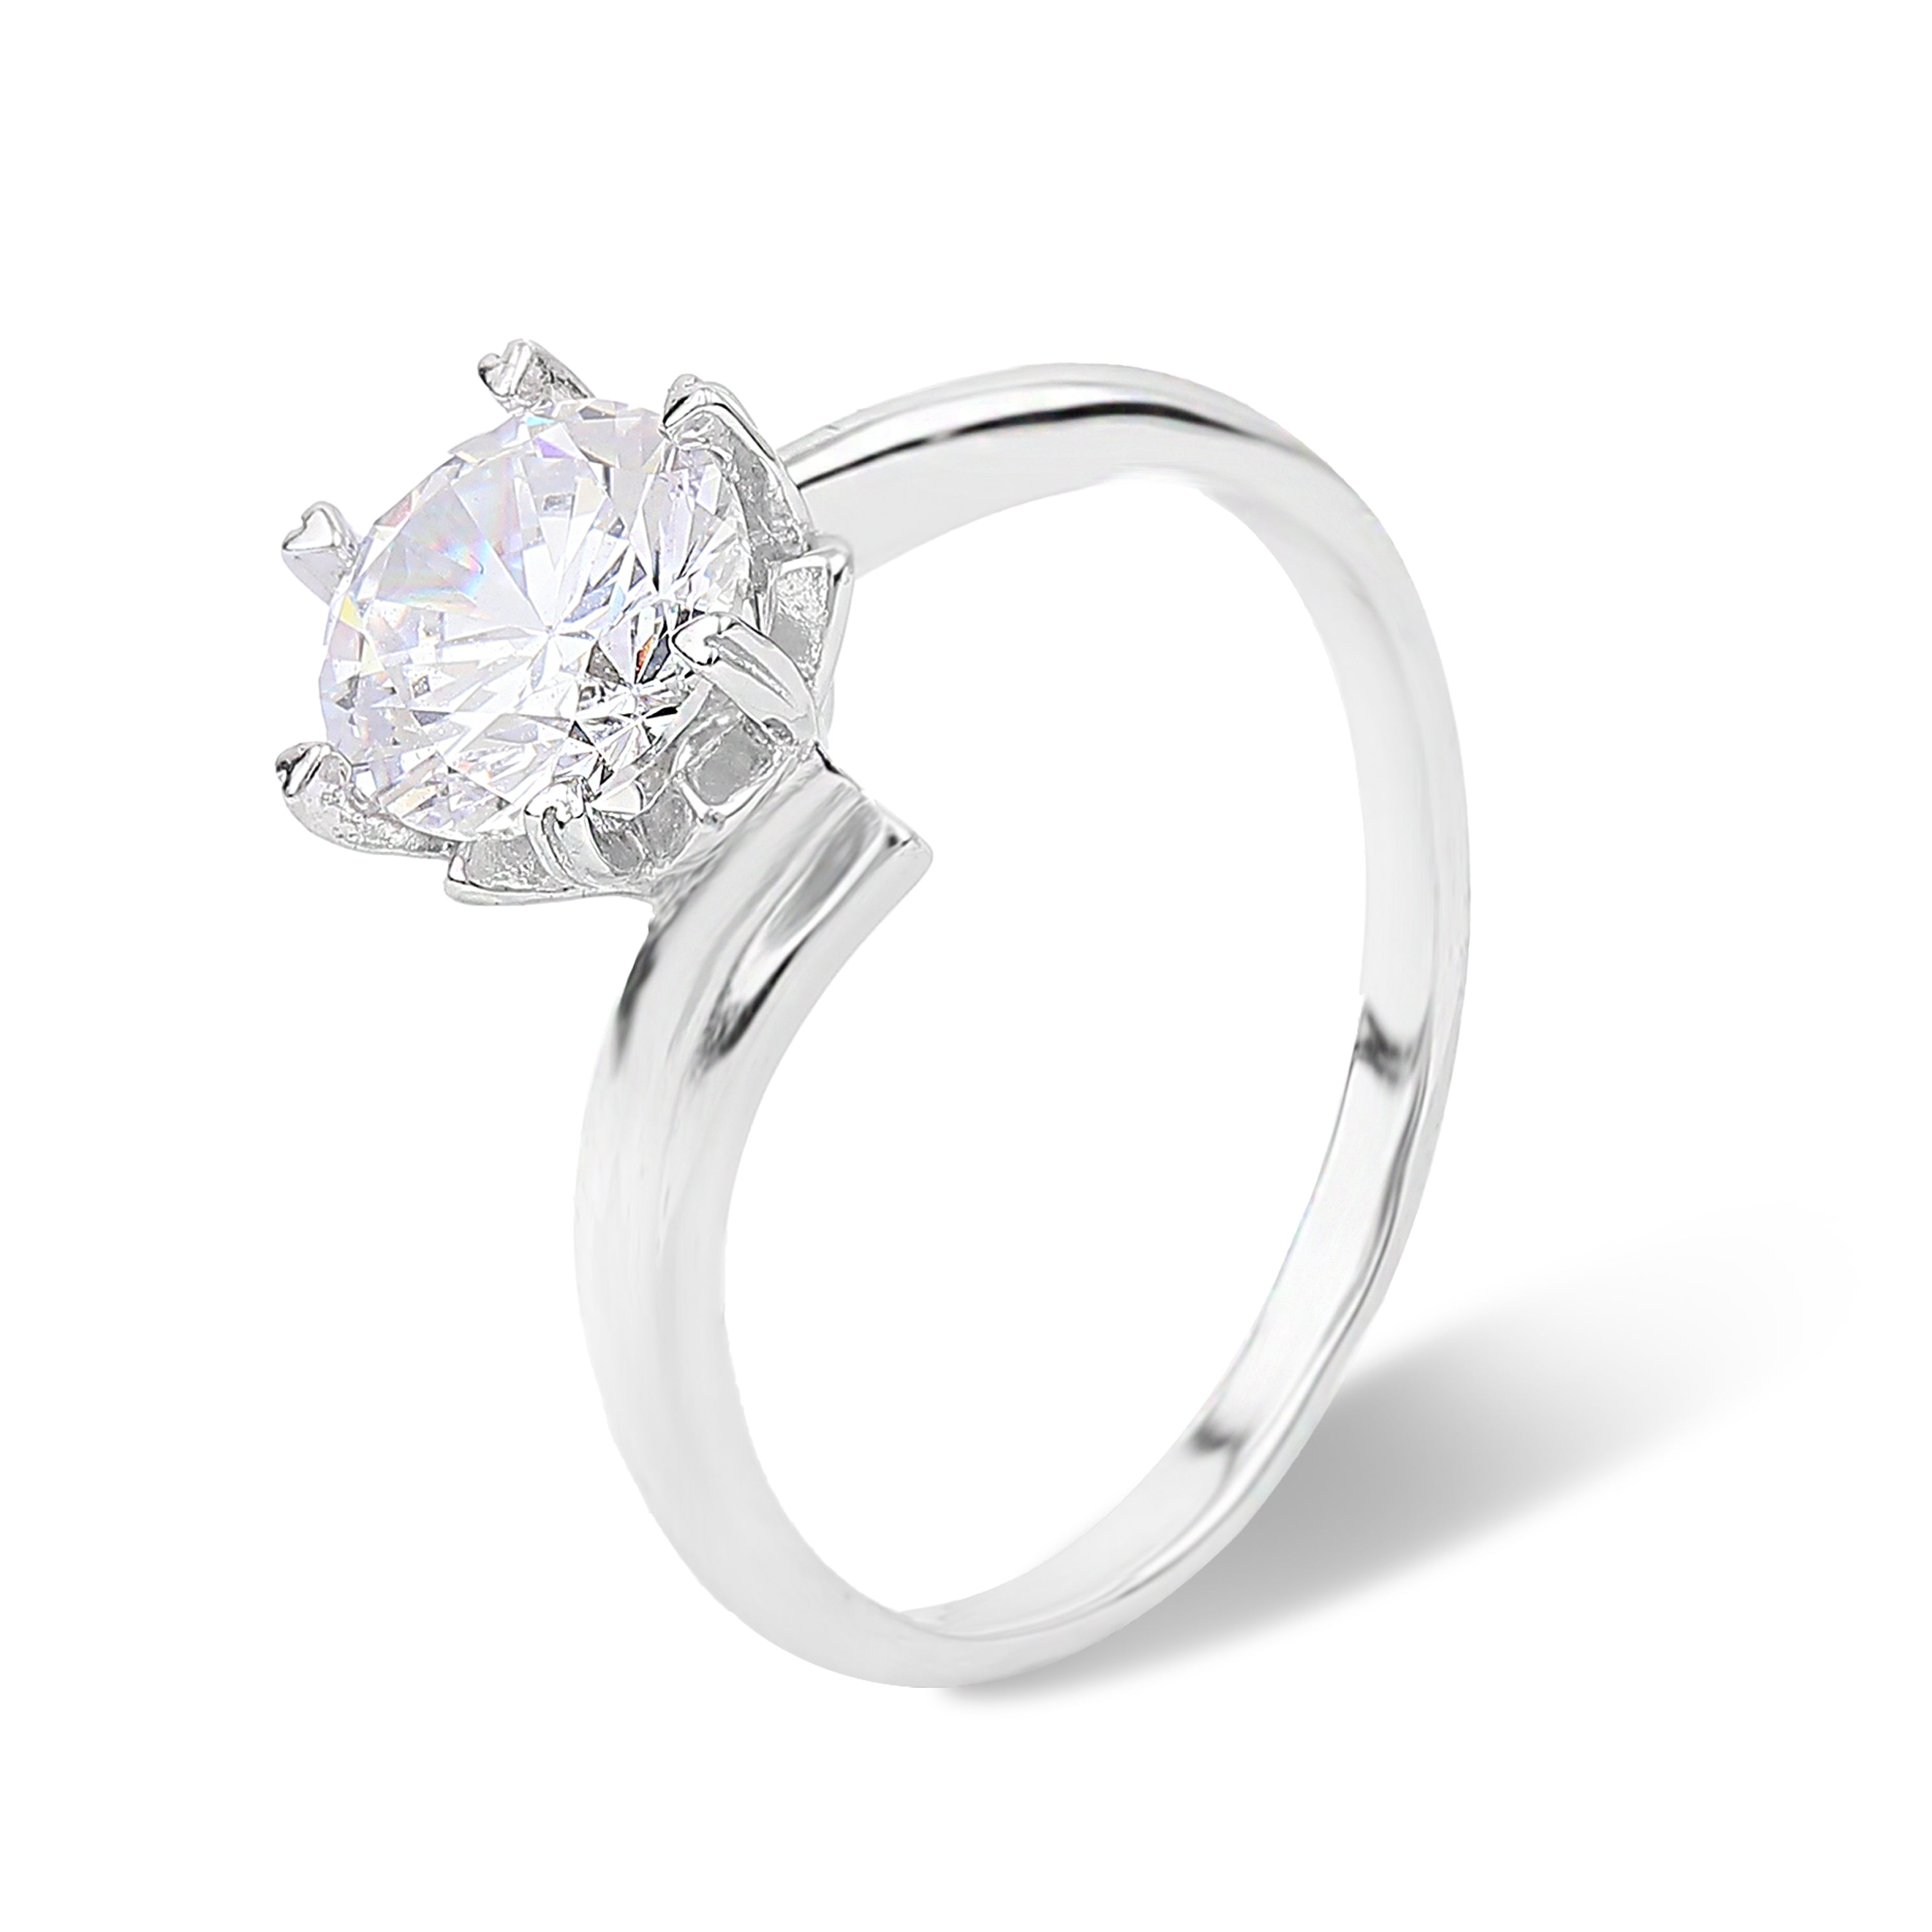 Silver solitaire diamond ring for ladies